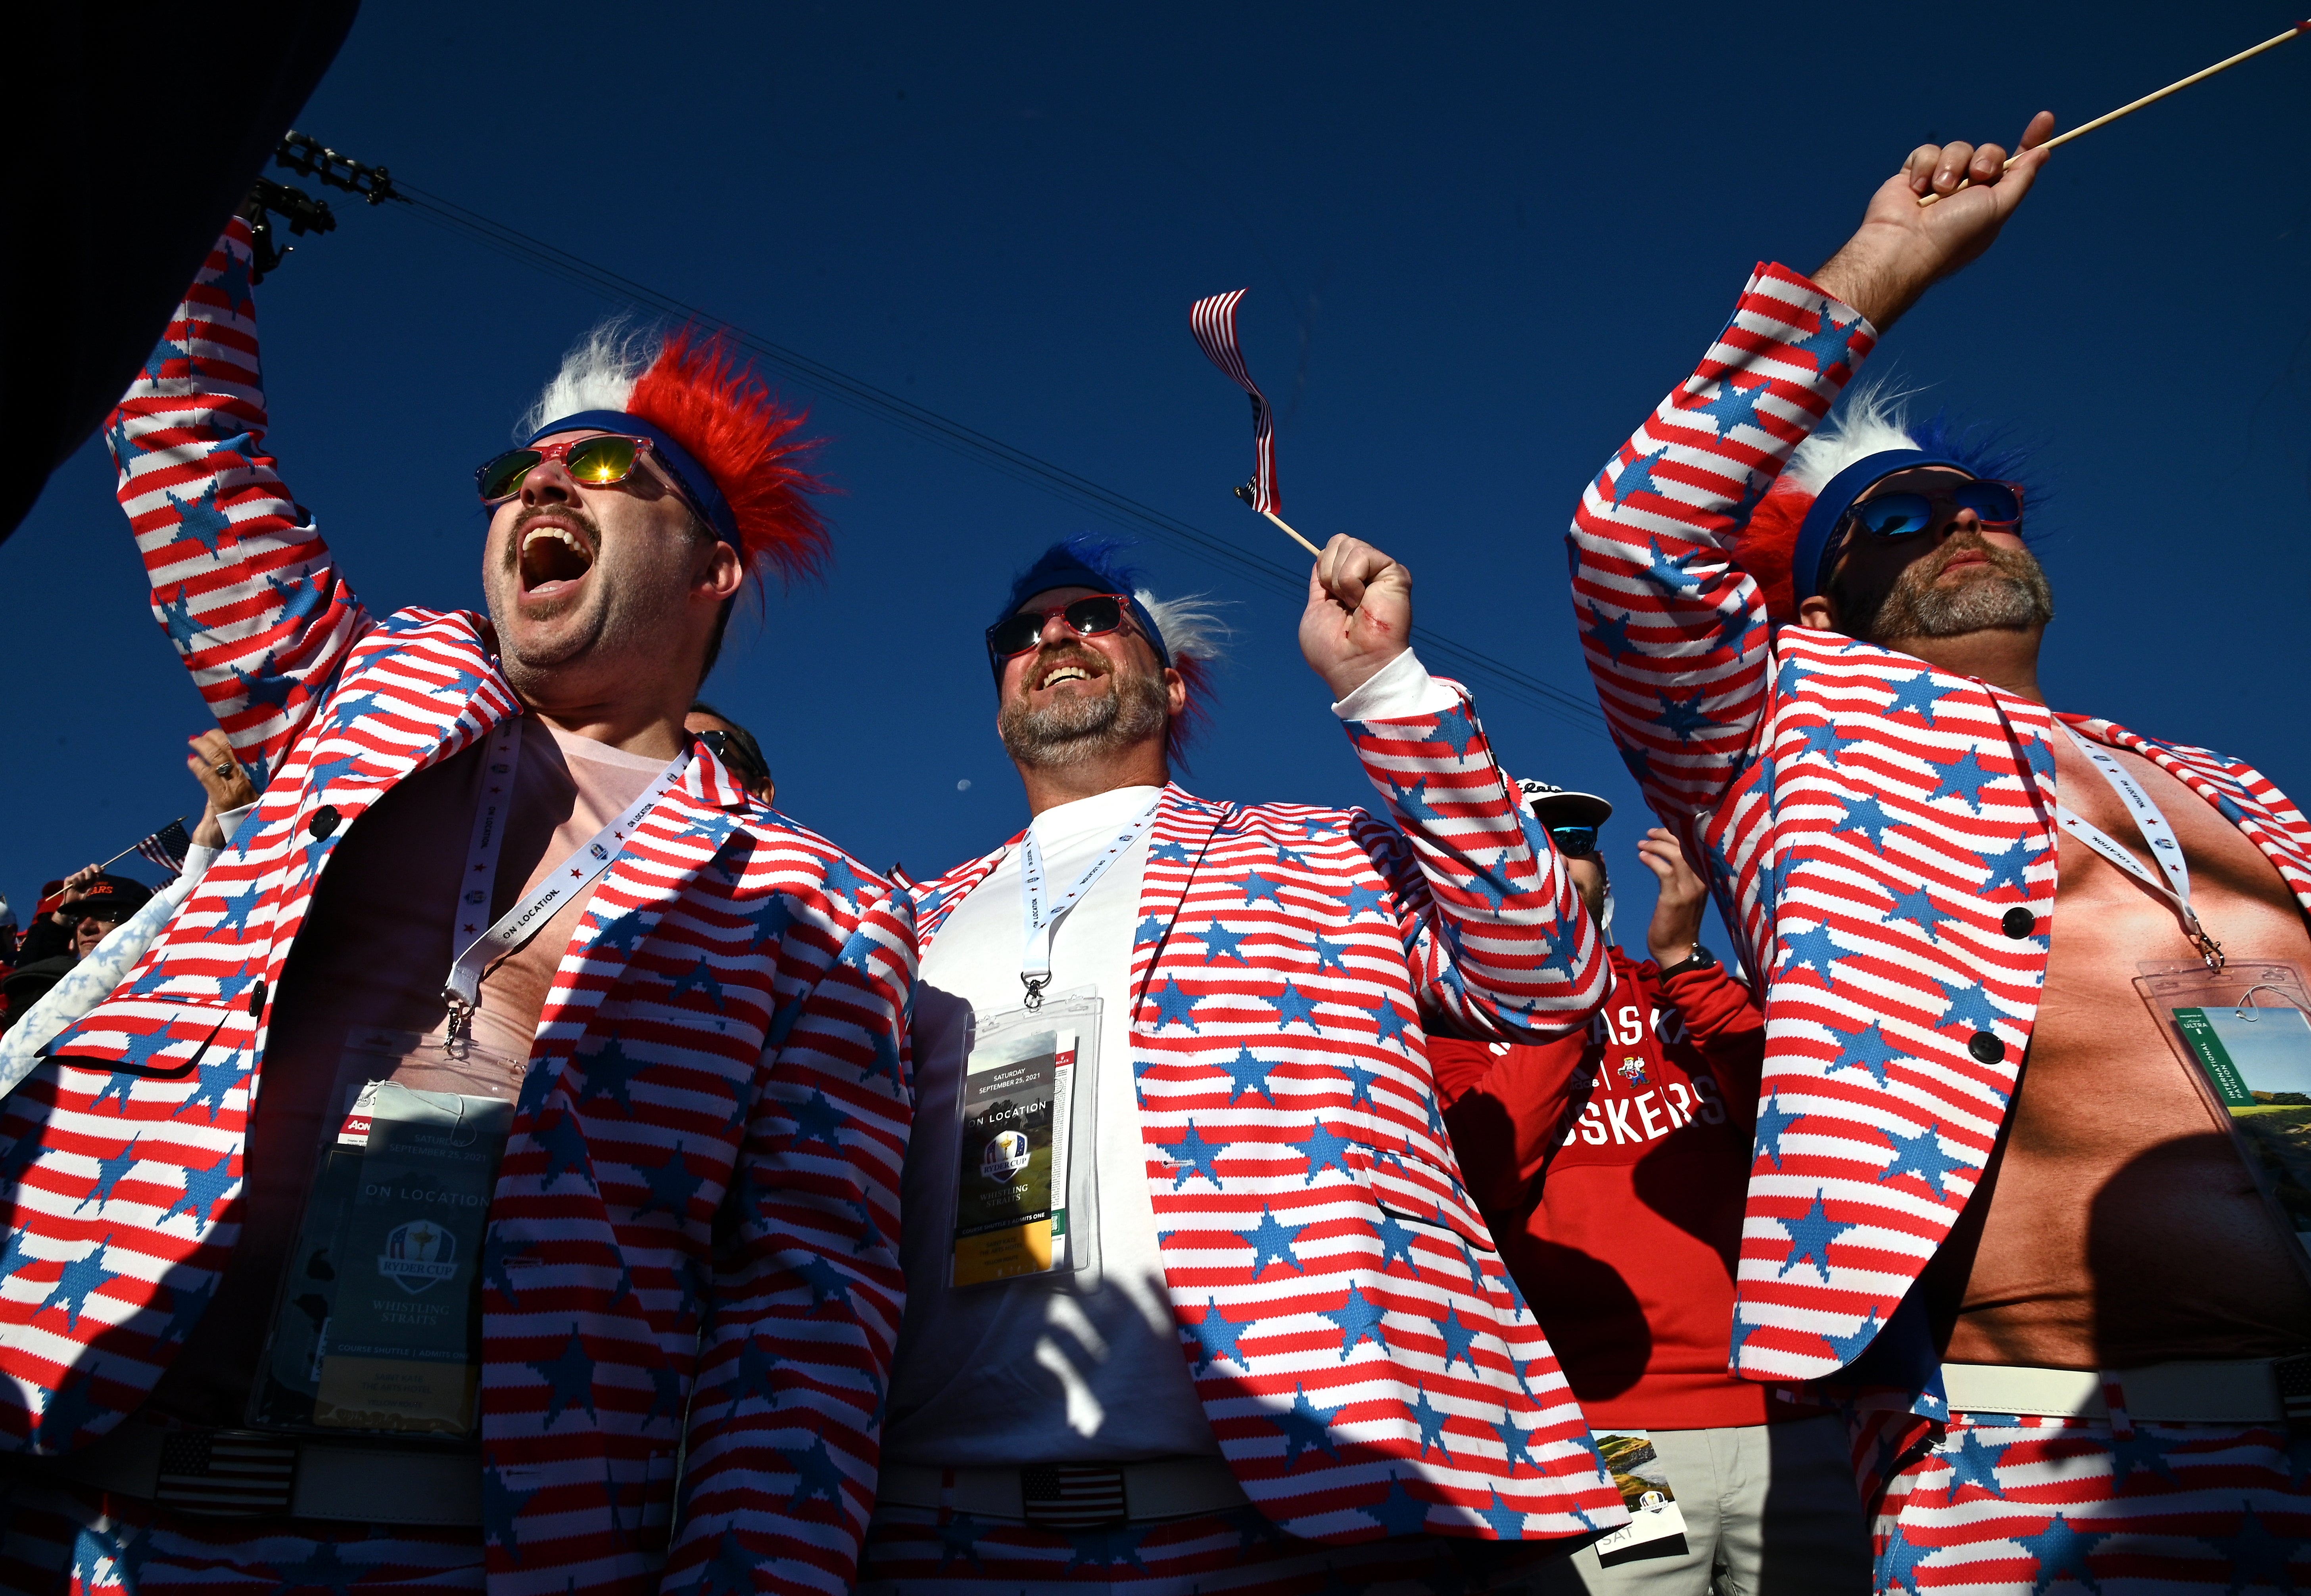 USA fans at the Ryder Cup in 2021